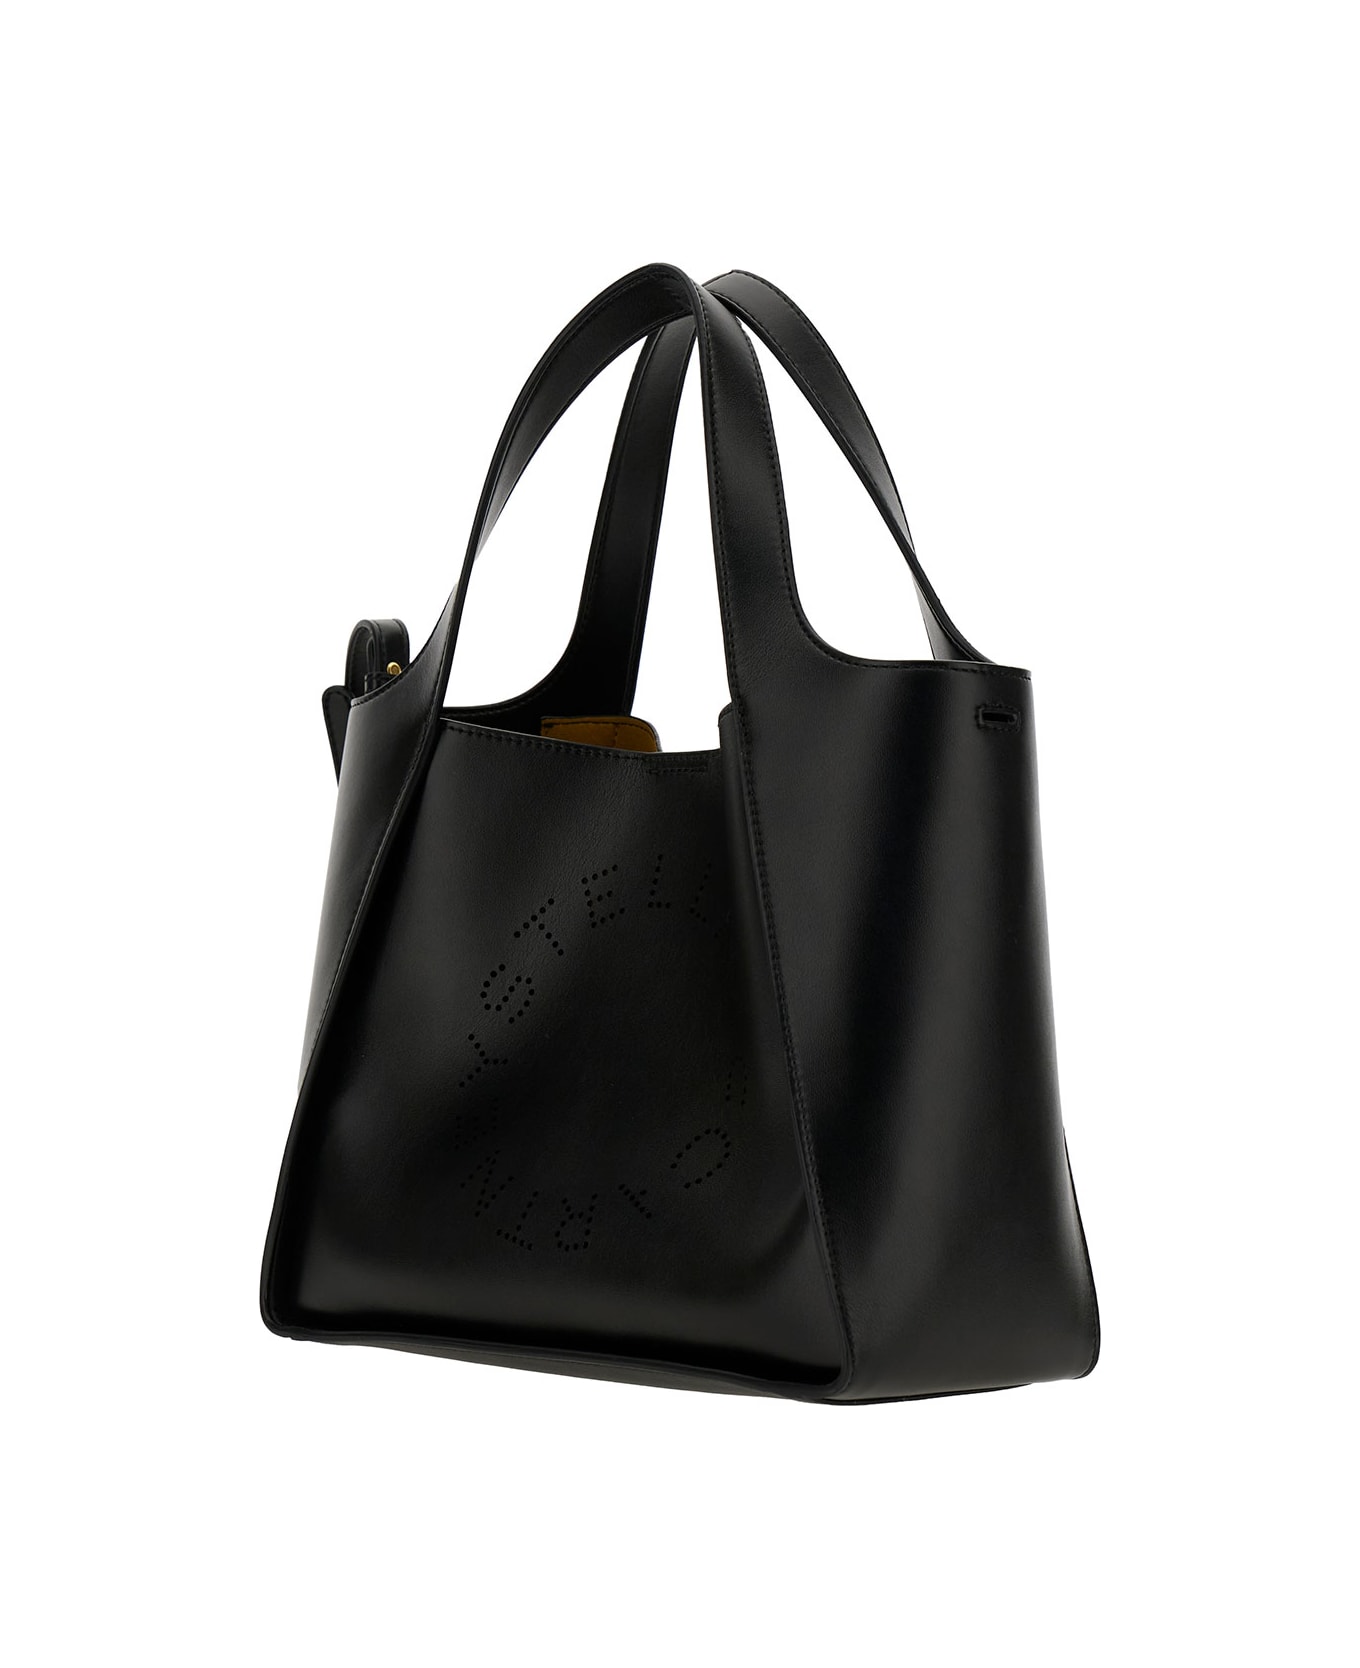 Stella McCartney Black Tote Bag With Perforated Logo Lettering Detail At The Front In Faux Leather Woman - Black